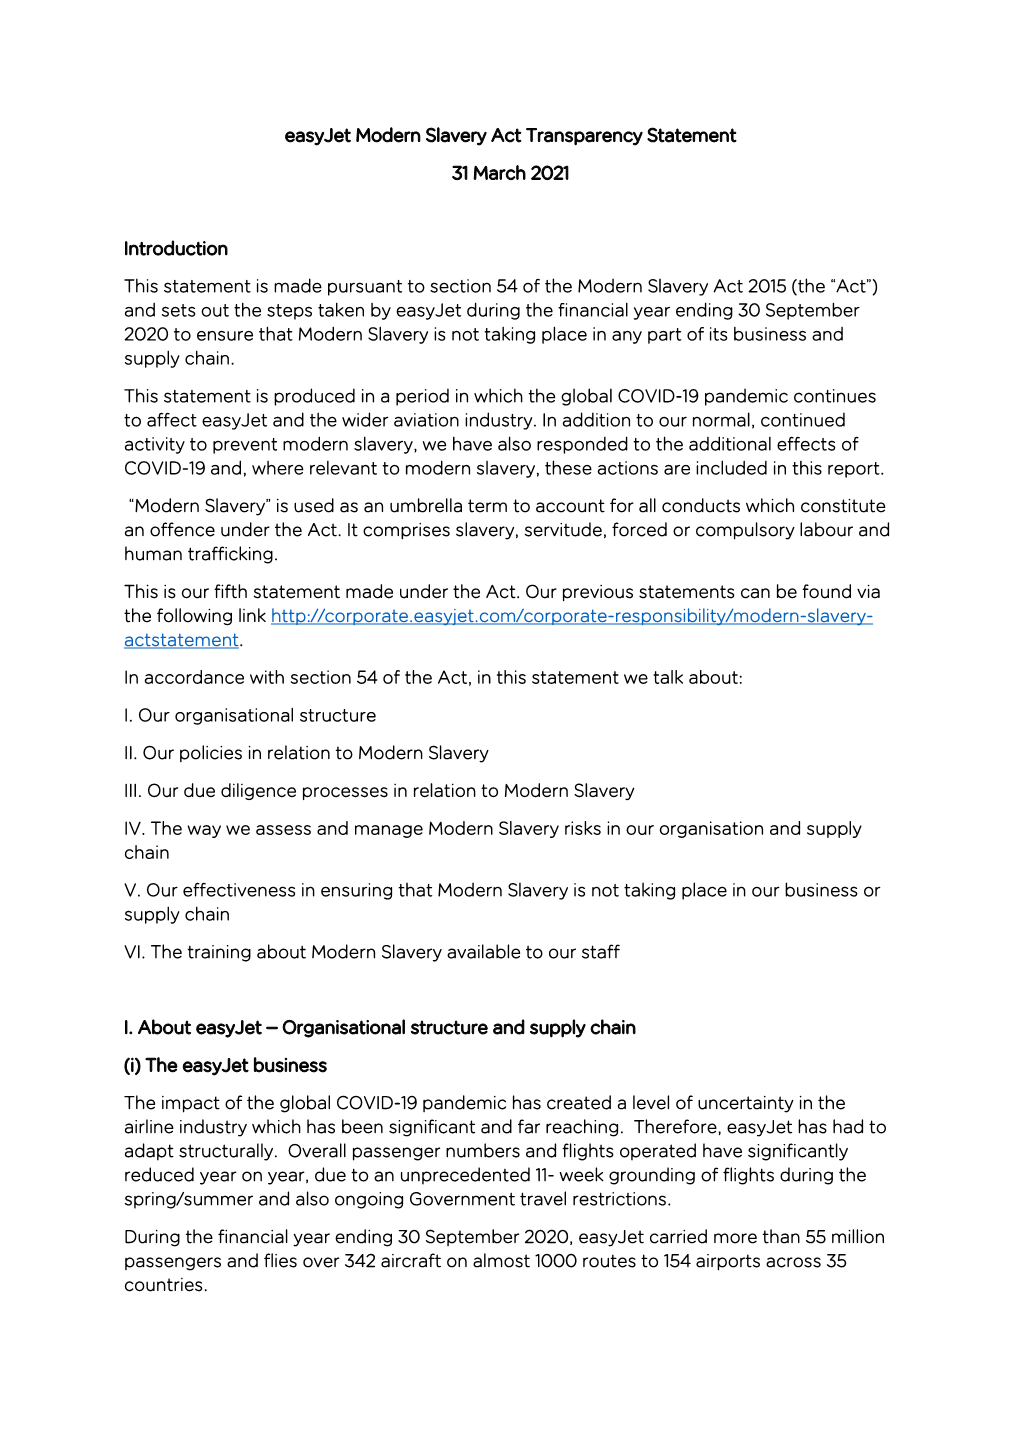 Easyjet Modern Slavery Act Transparency Statement 31 March